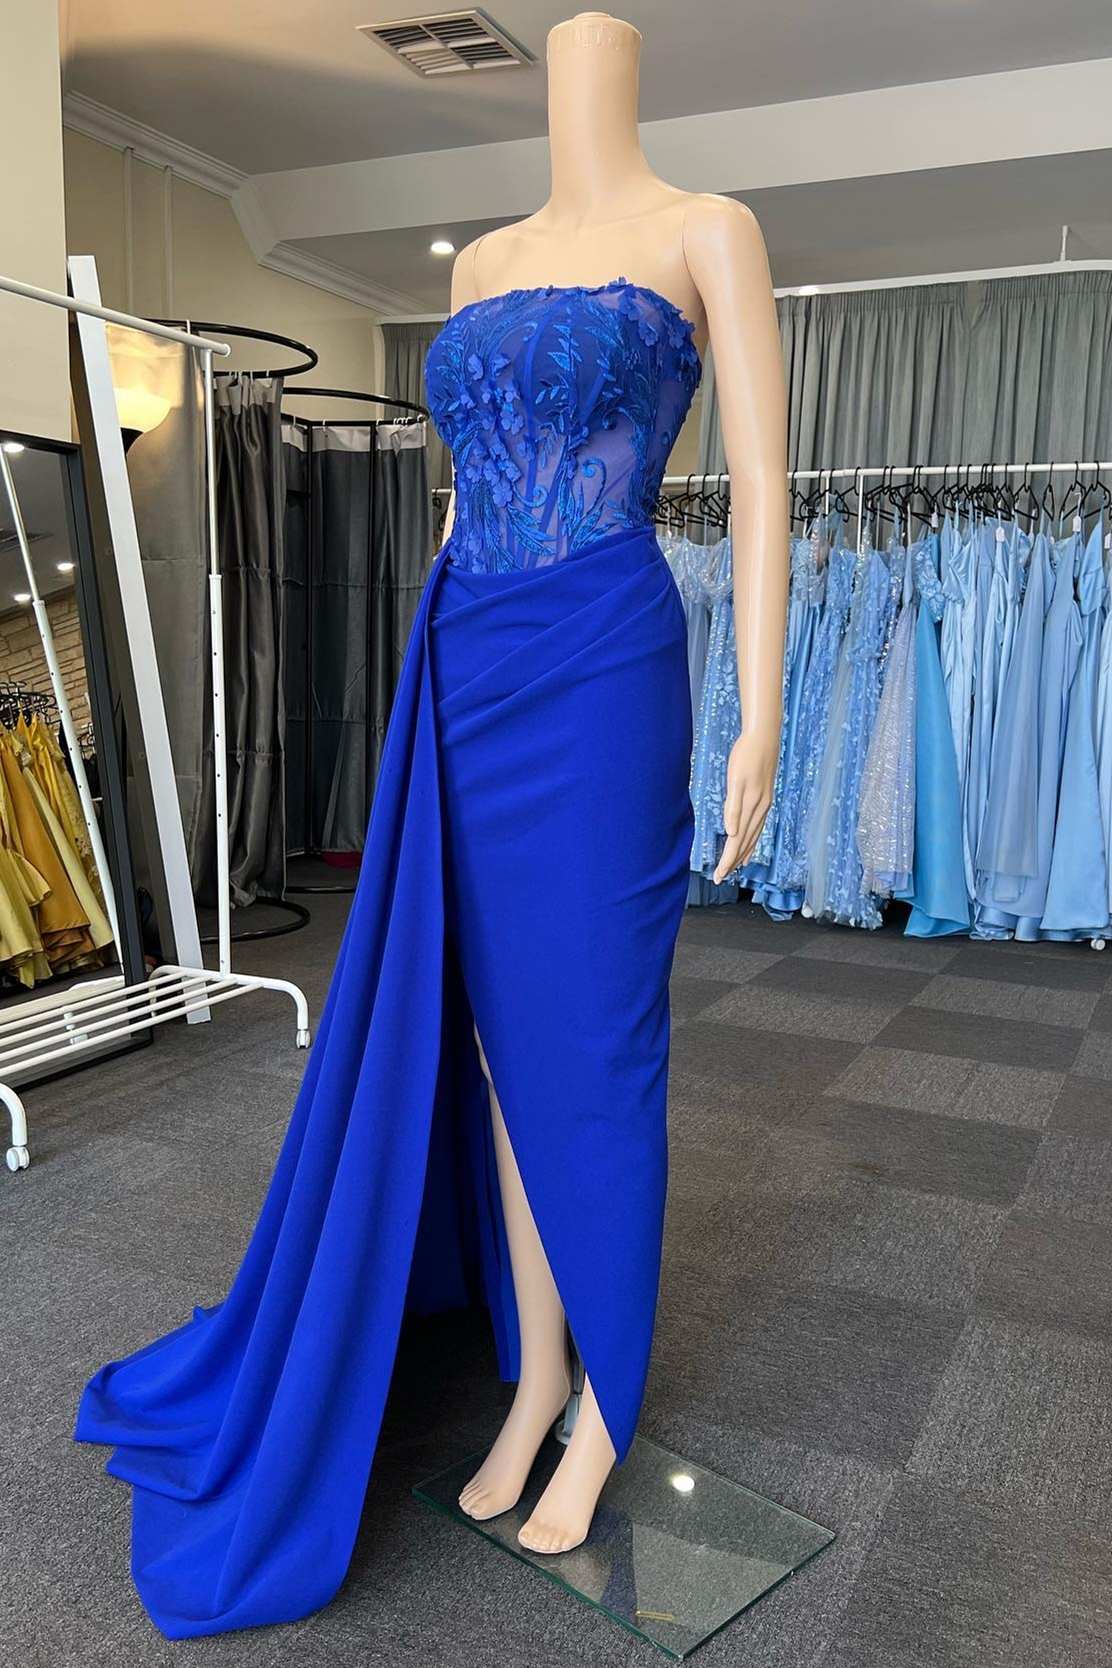 Bridesmaid Dresses Convertible, Royal Blue Appliques Strapless Long Formal Gown with Attached Train